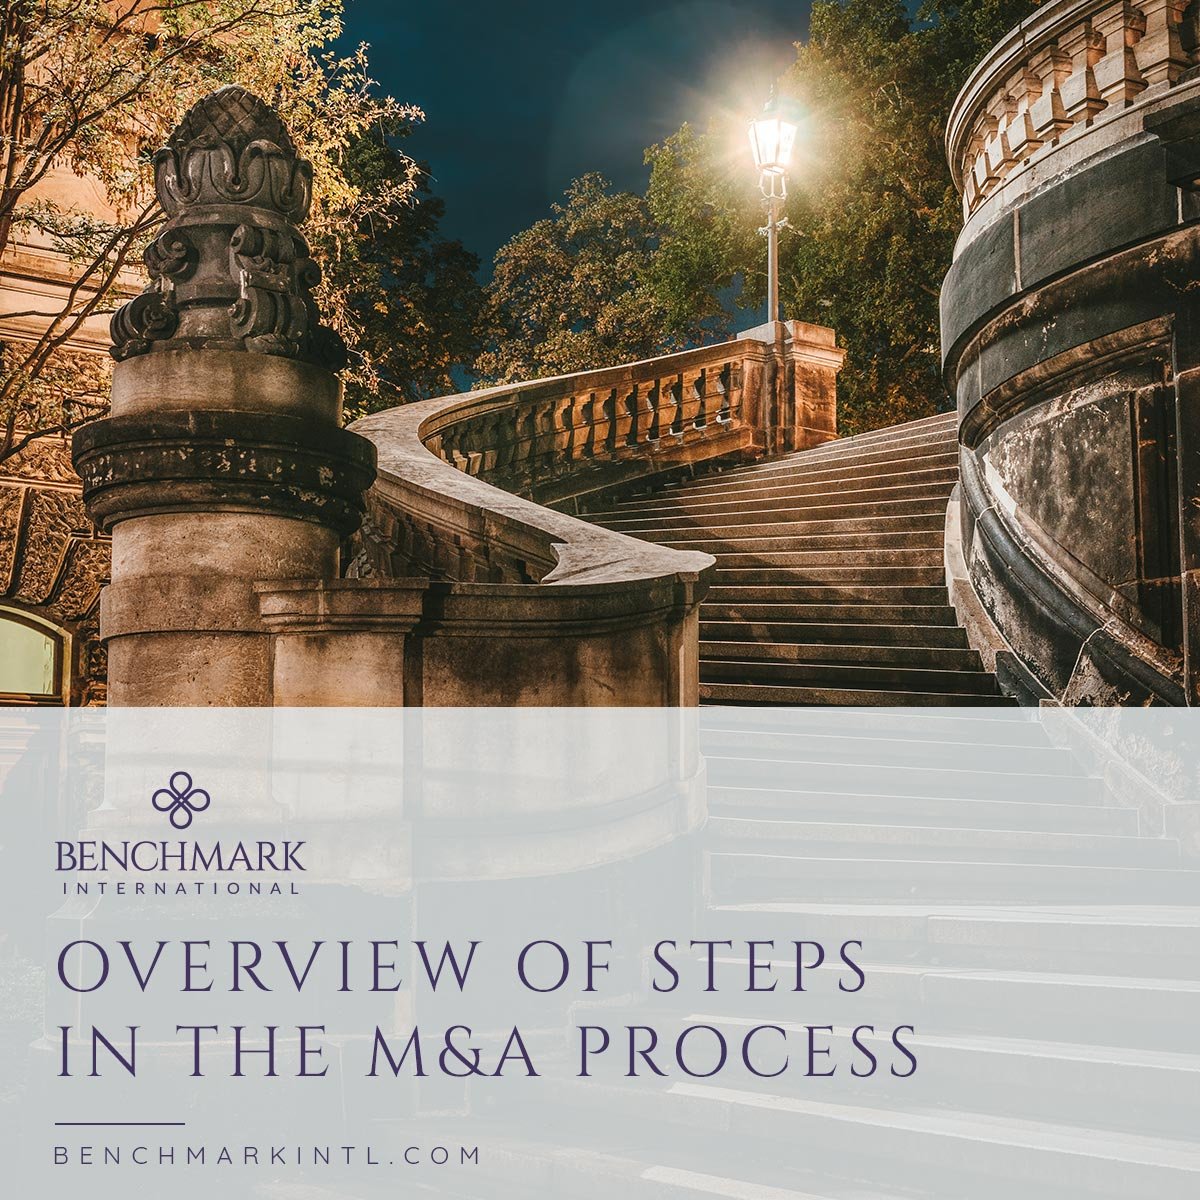 Overview_Of_Steps_In_The_M&A_Process_Social